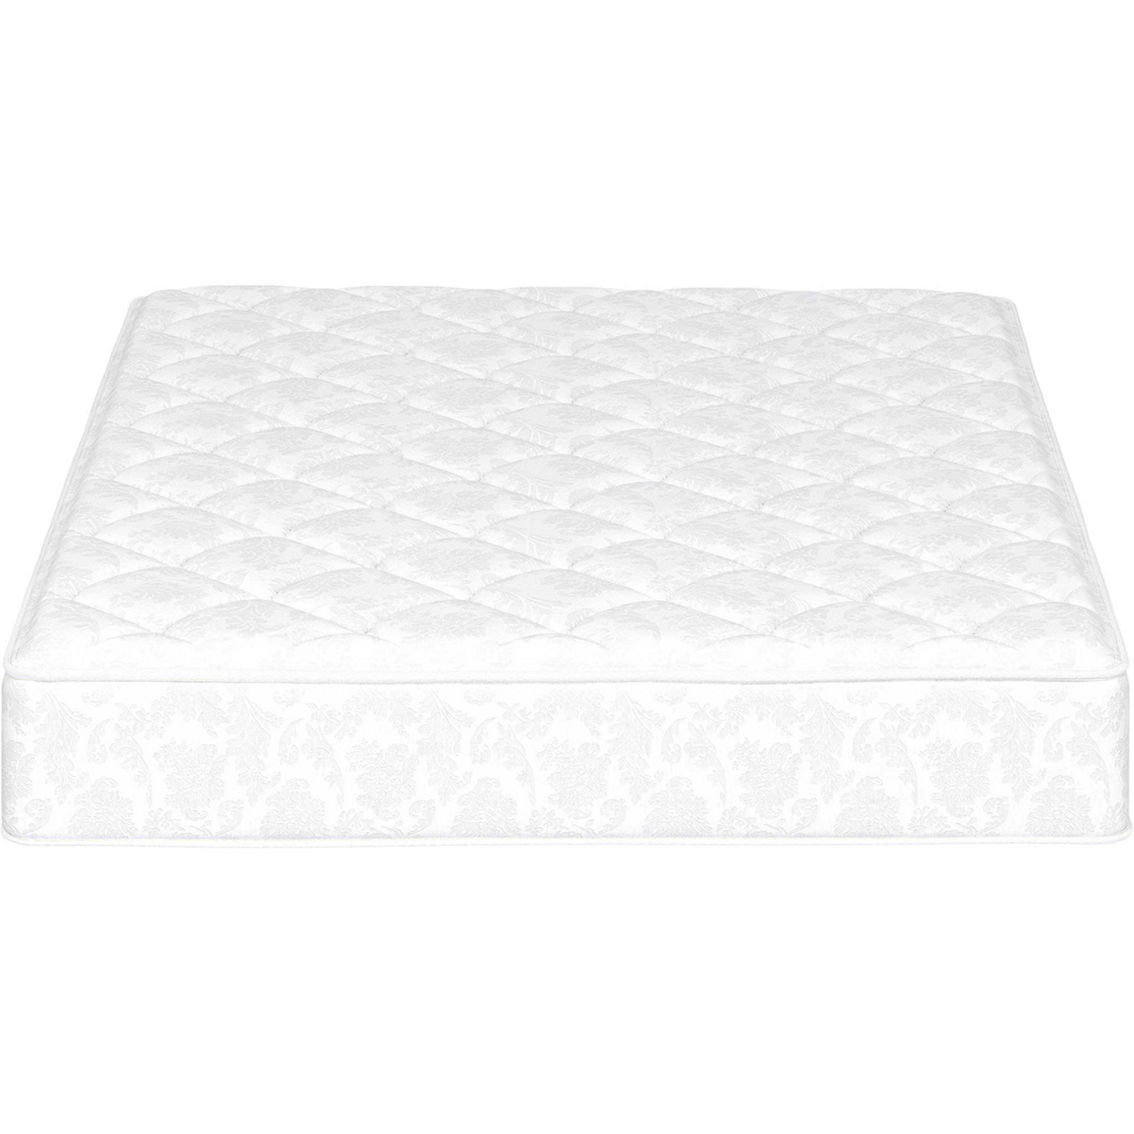 Eclipse Health-o-Pedic Quilted Memory Foam 10 in. Mattress - Image 2 of 6